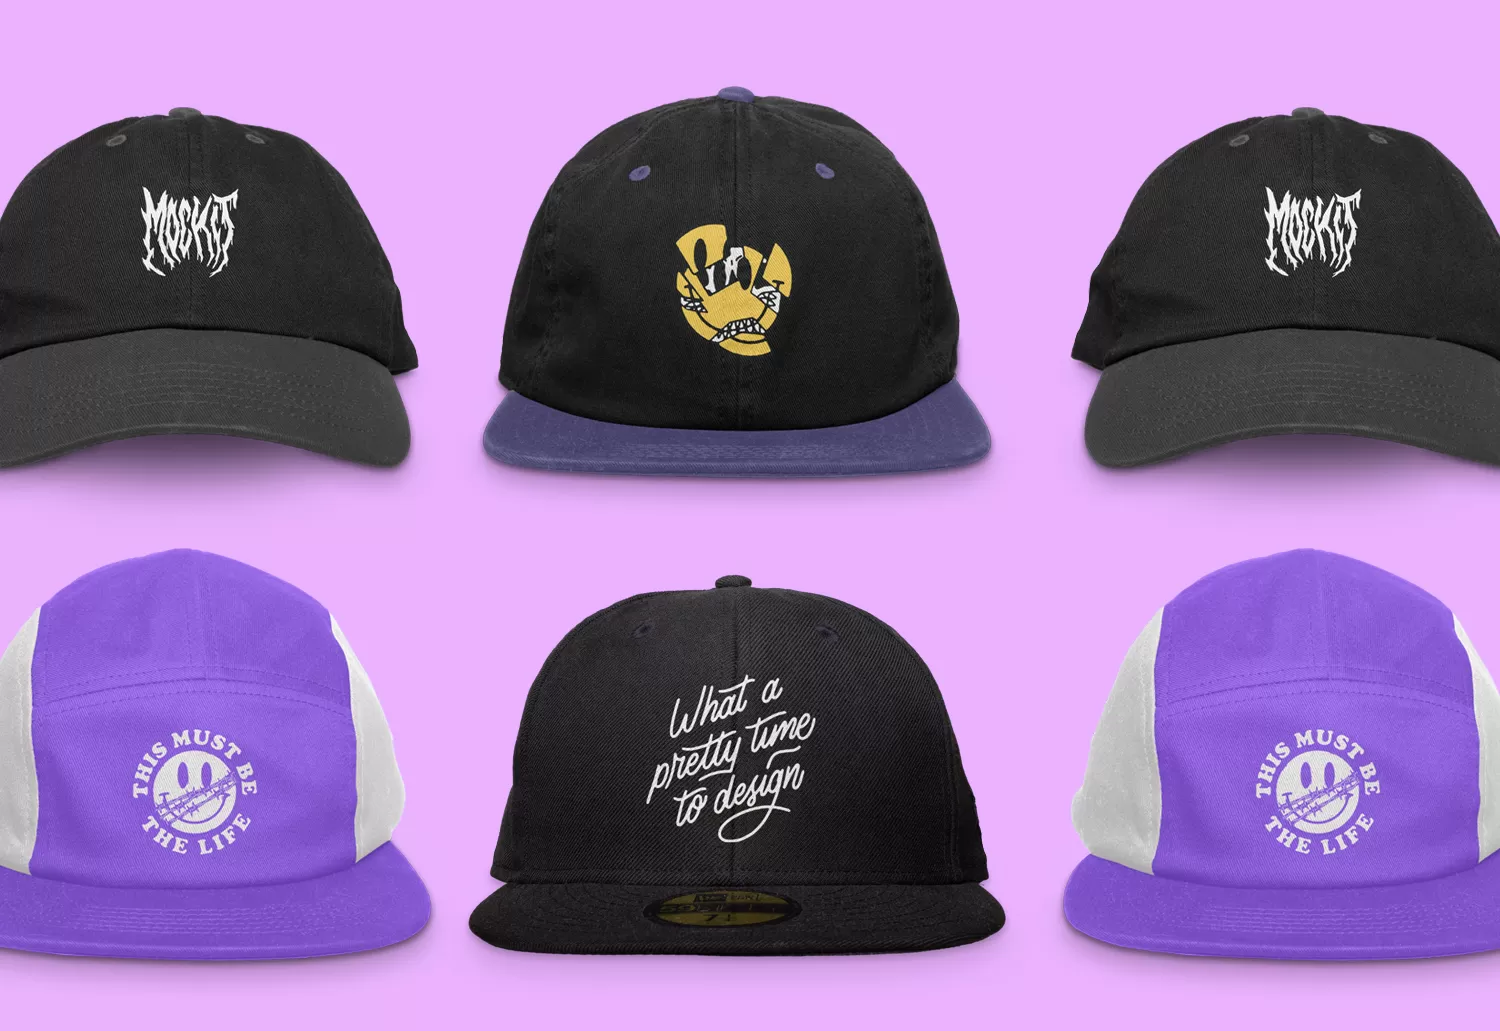 Stunning New Hat Mockups Added to Library!